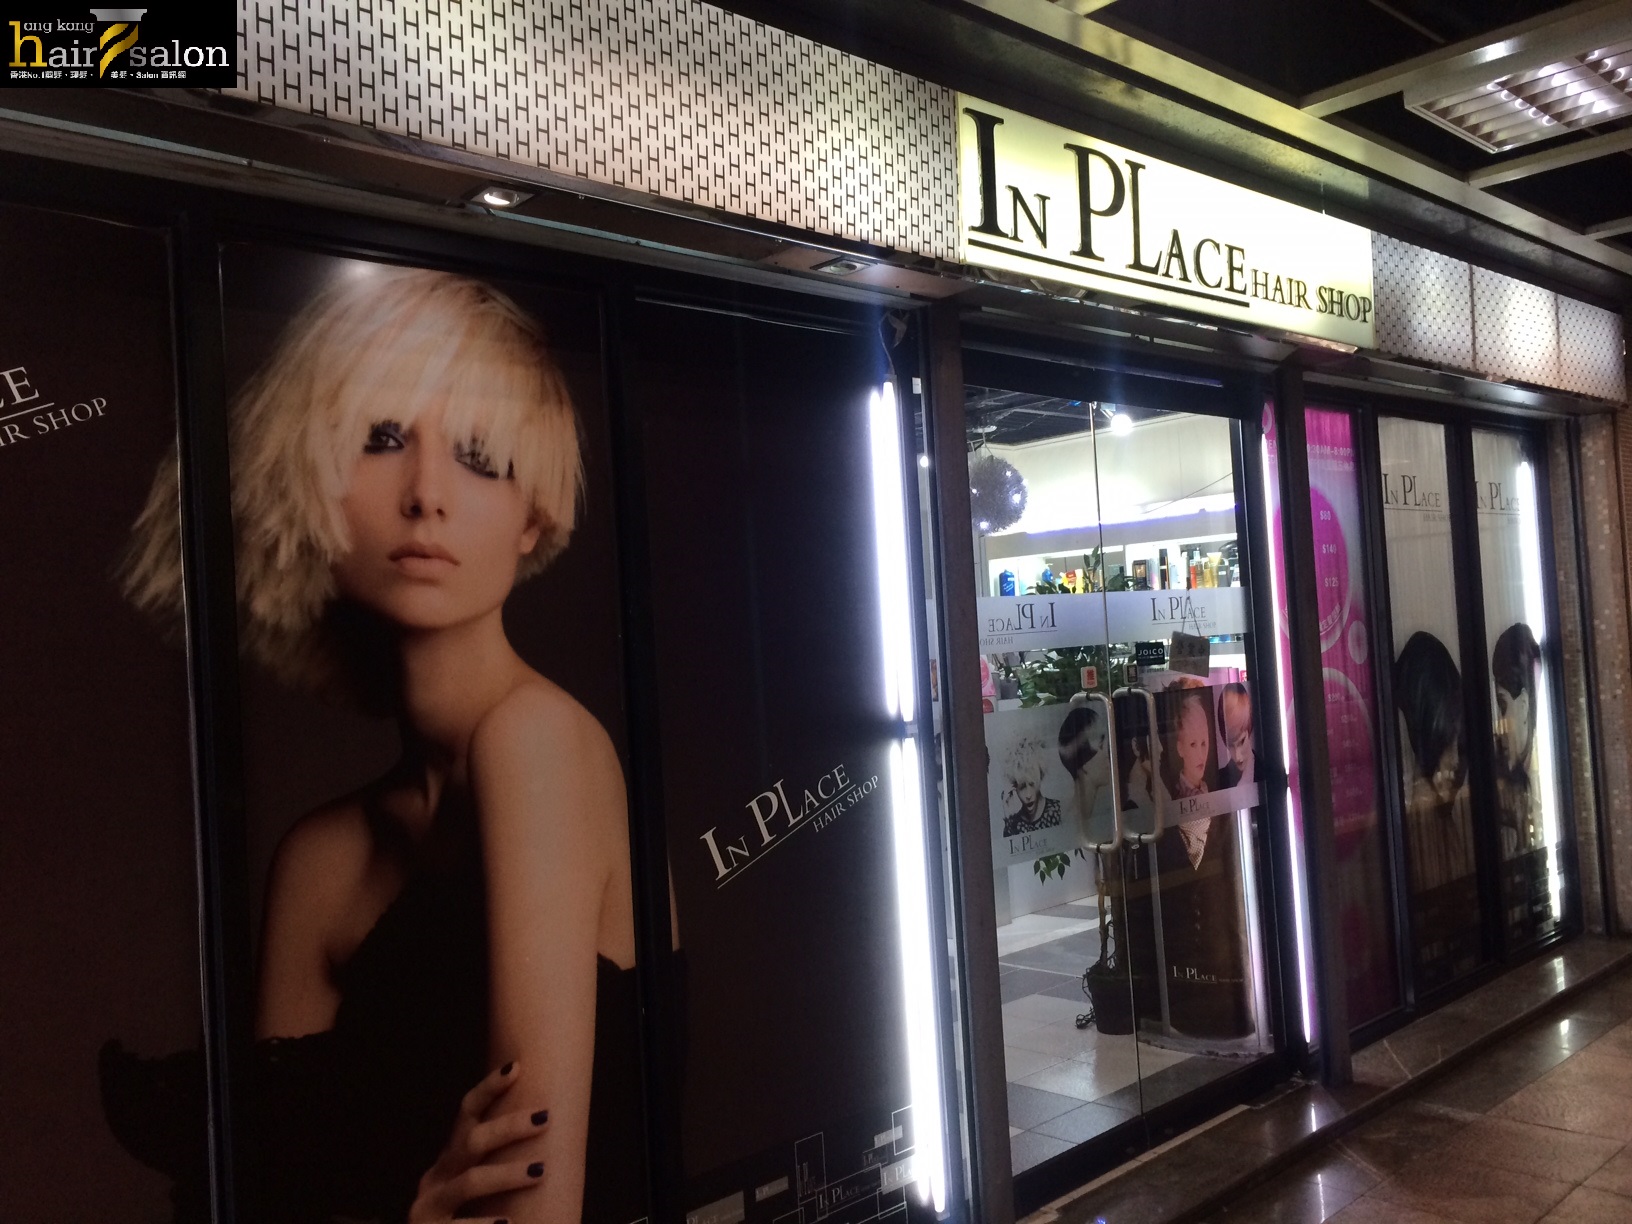 Electric hair: In Place Hair Shop 進念